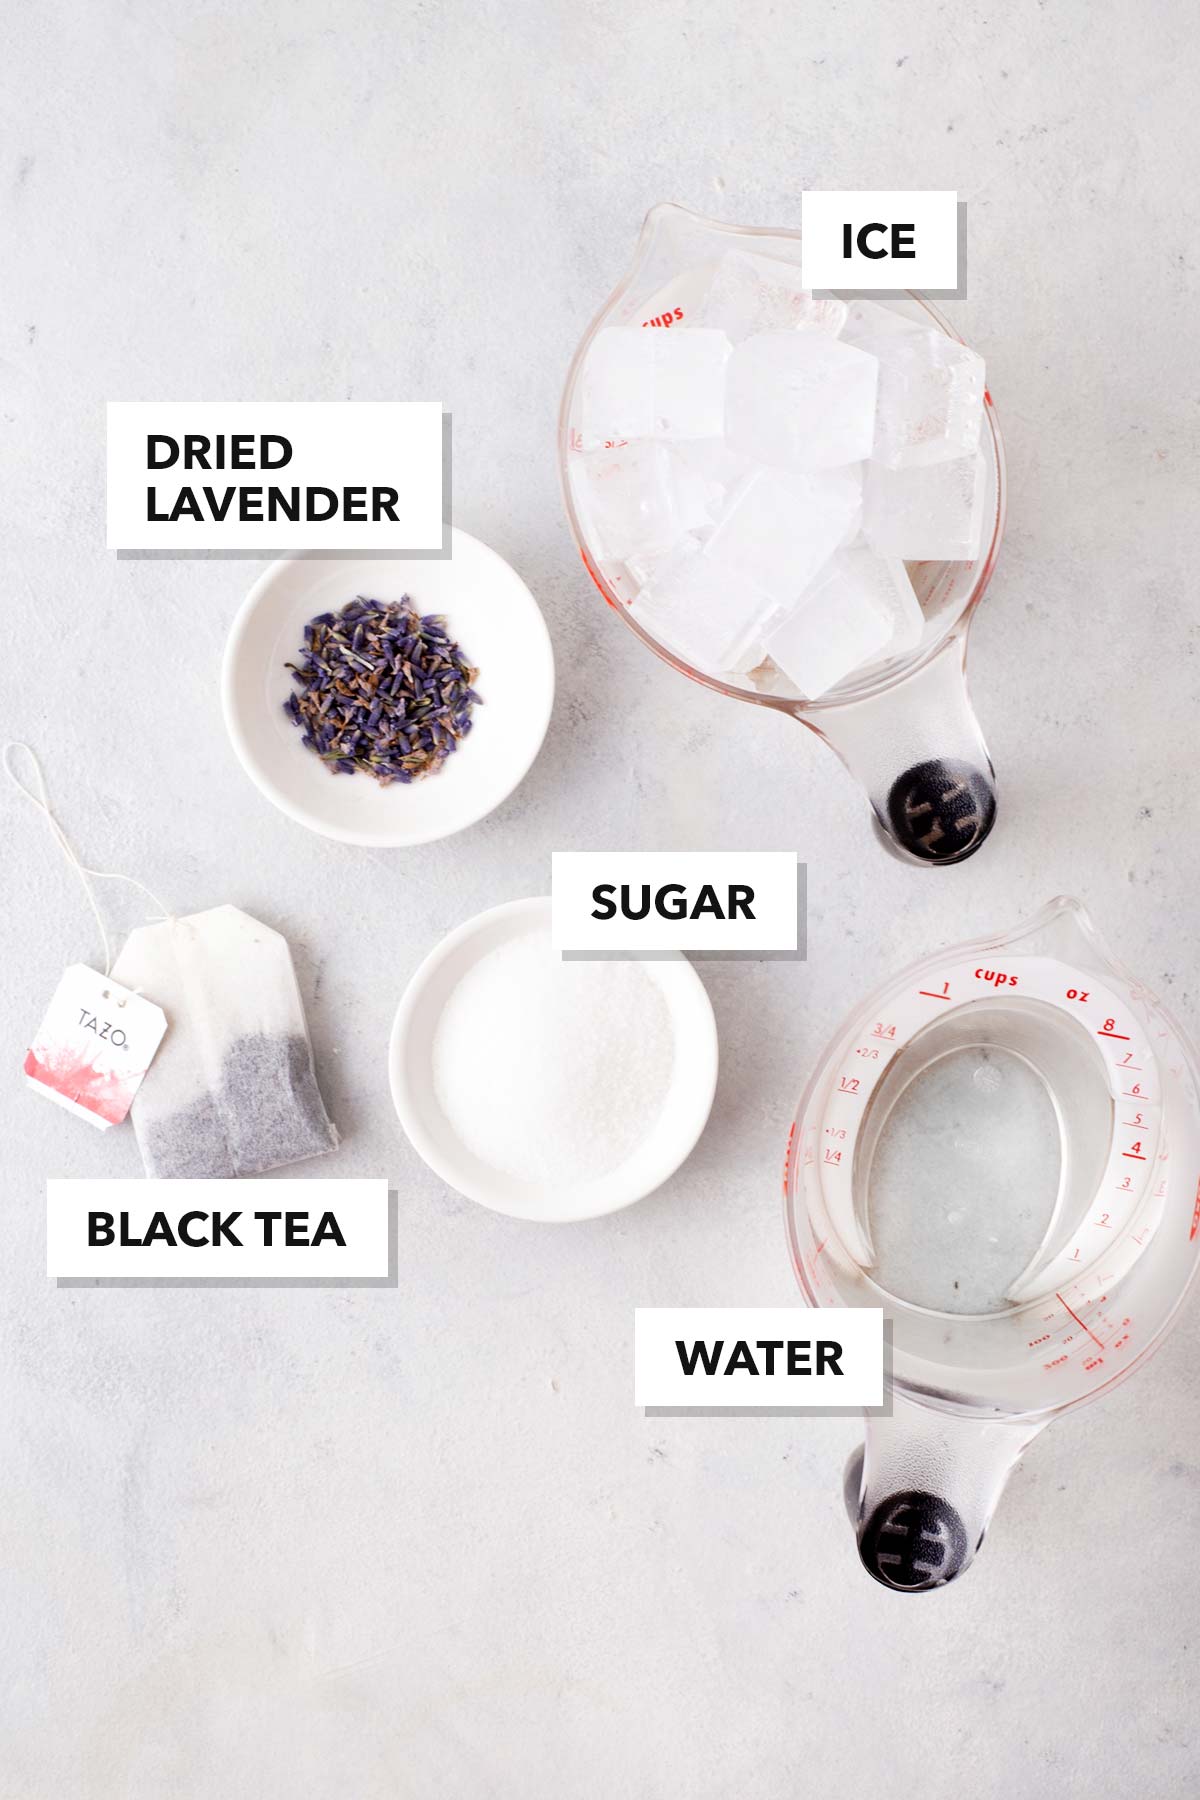 Iced Lavender Black Tea ingredients measured in cups and labeled on a table.